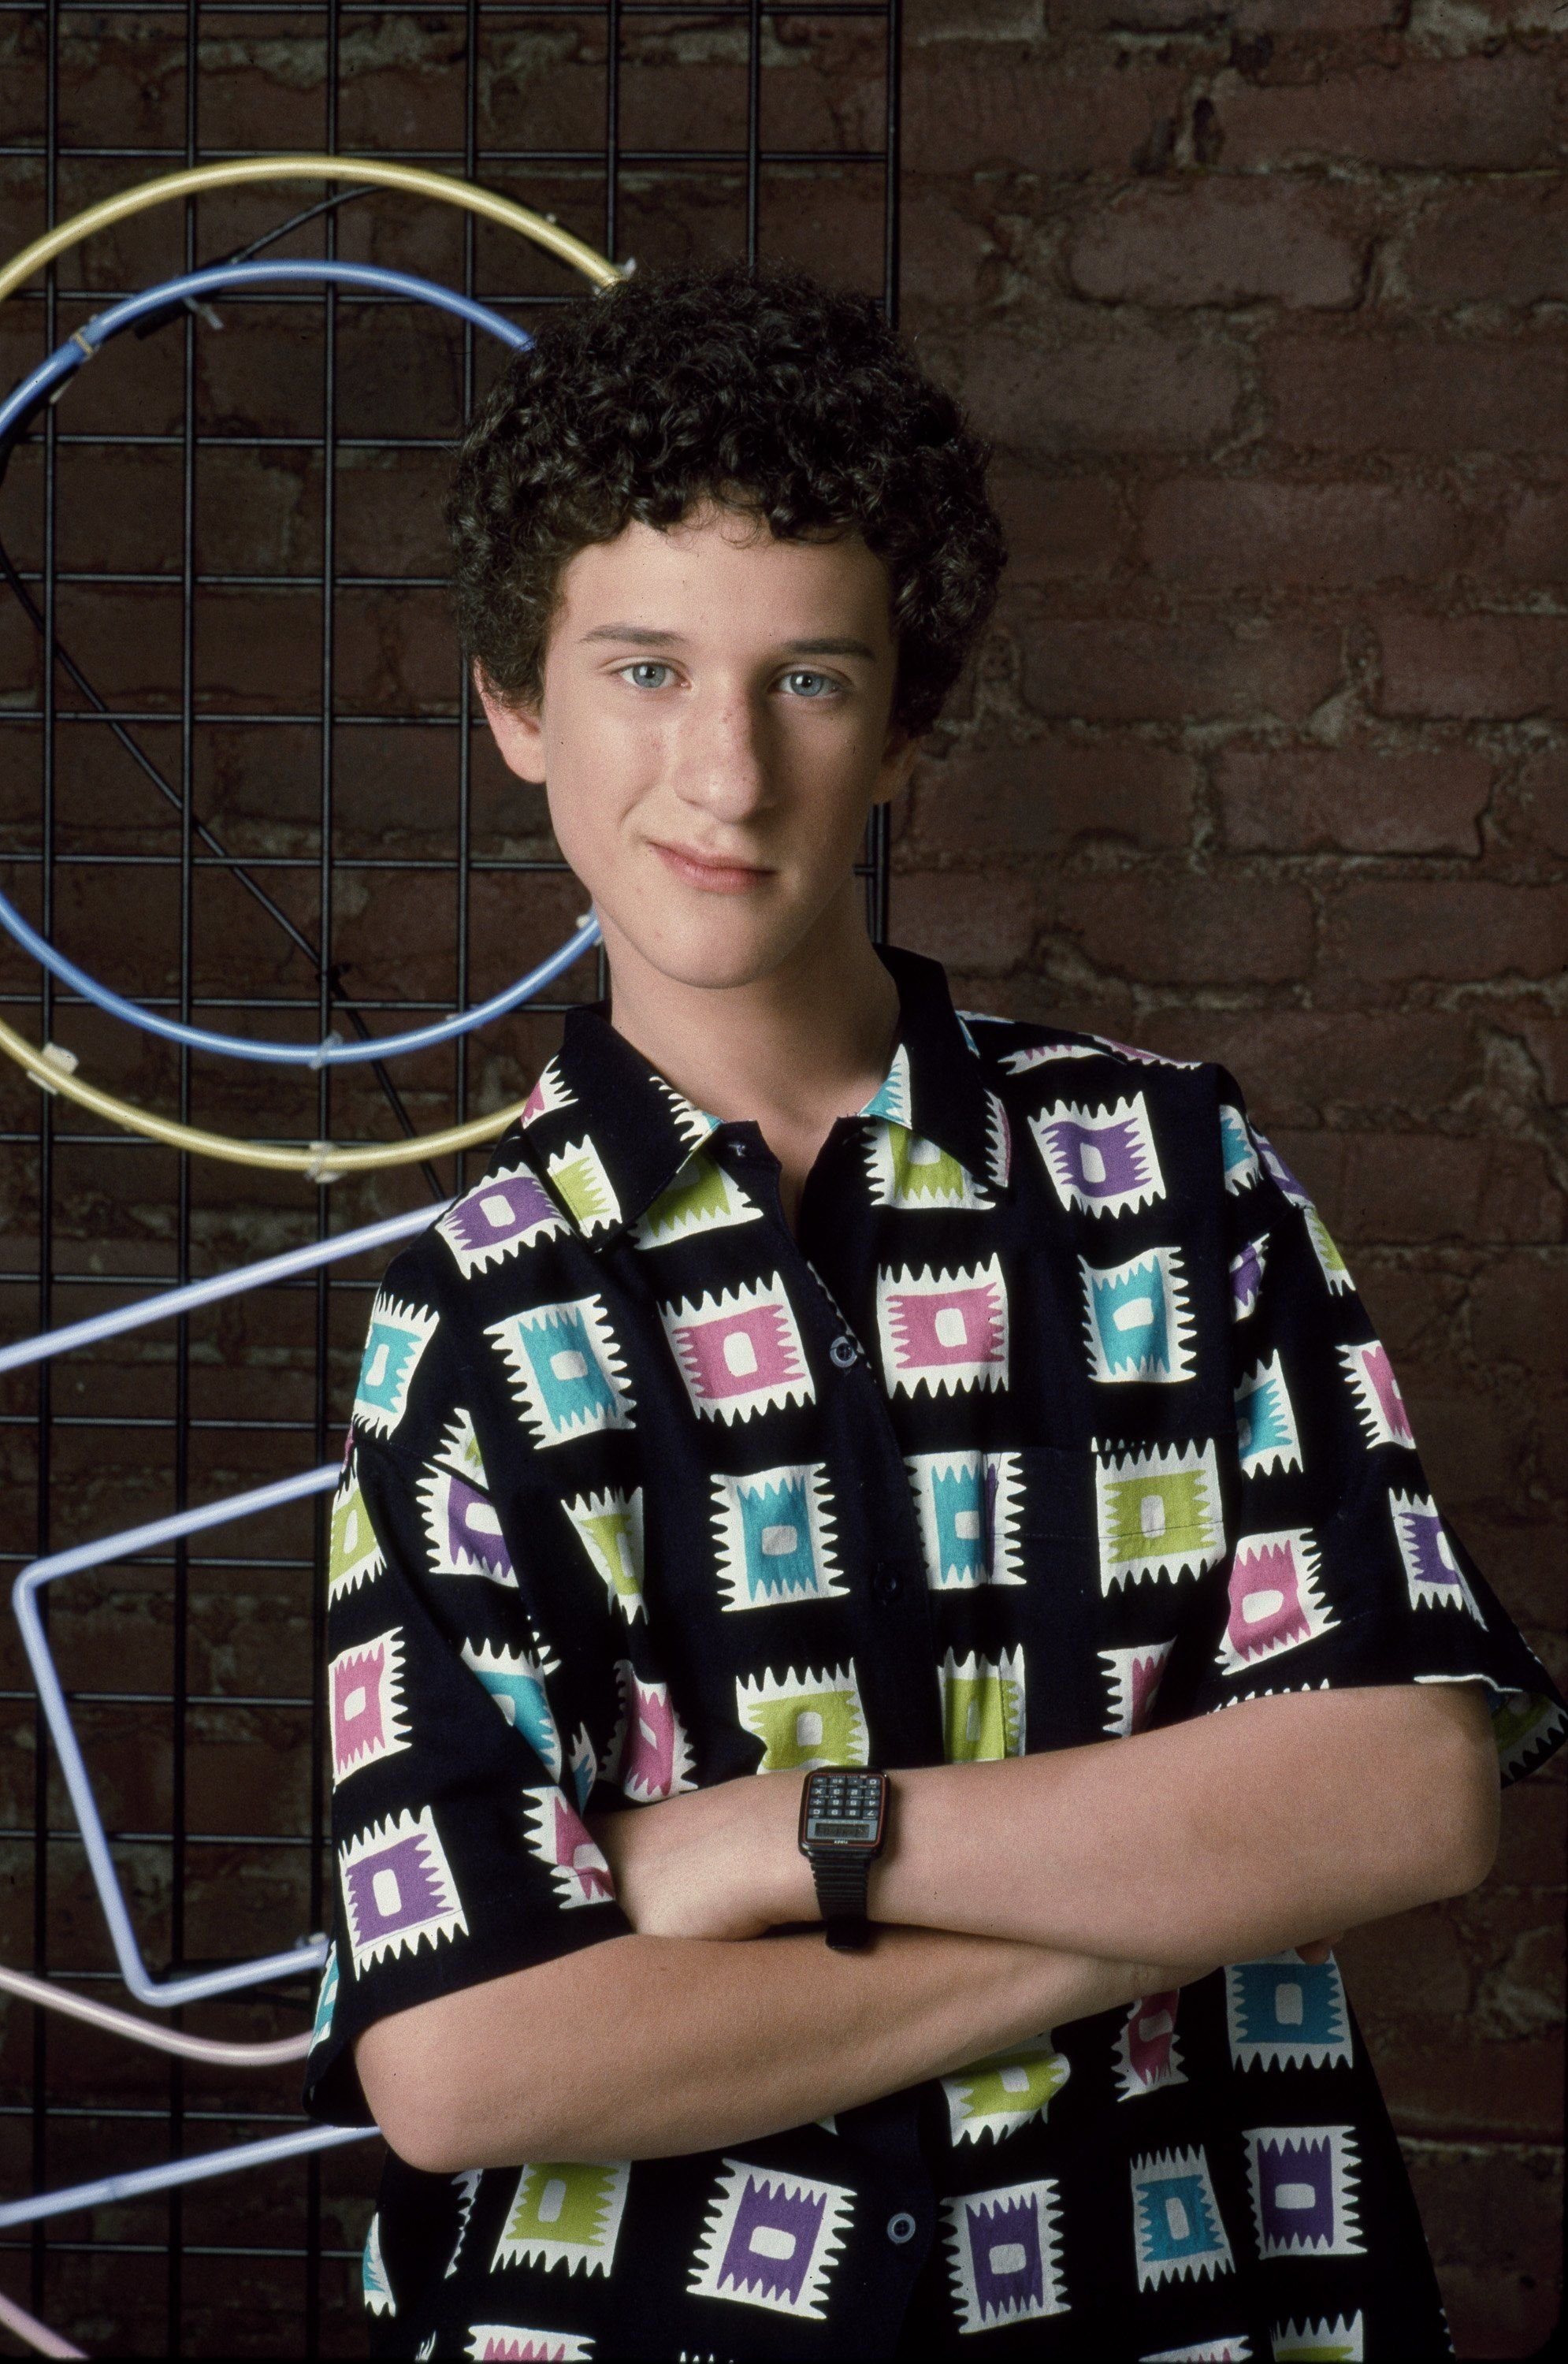 A portrait of Dustin Diamond as Samuel "Screech" Powers in a photo uploaded on  October 03, 2006 | Photo: NBCU Photo Bank/Getty Images